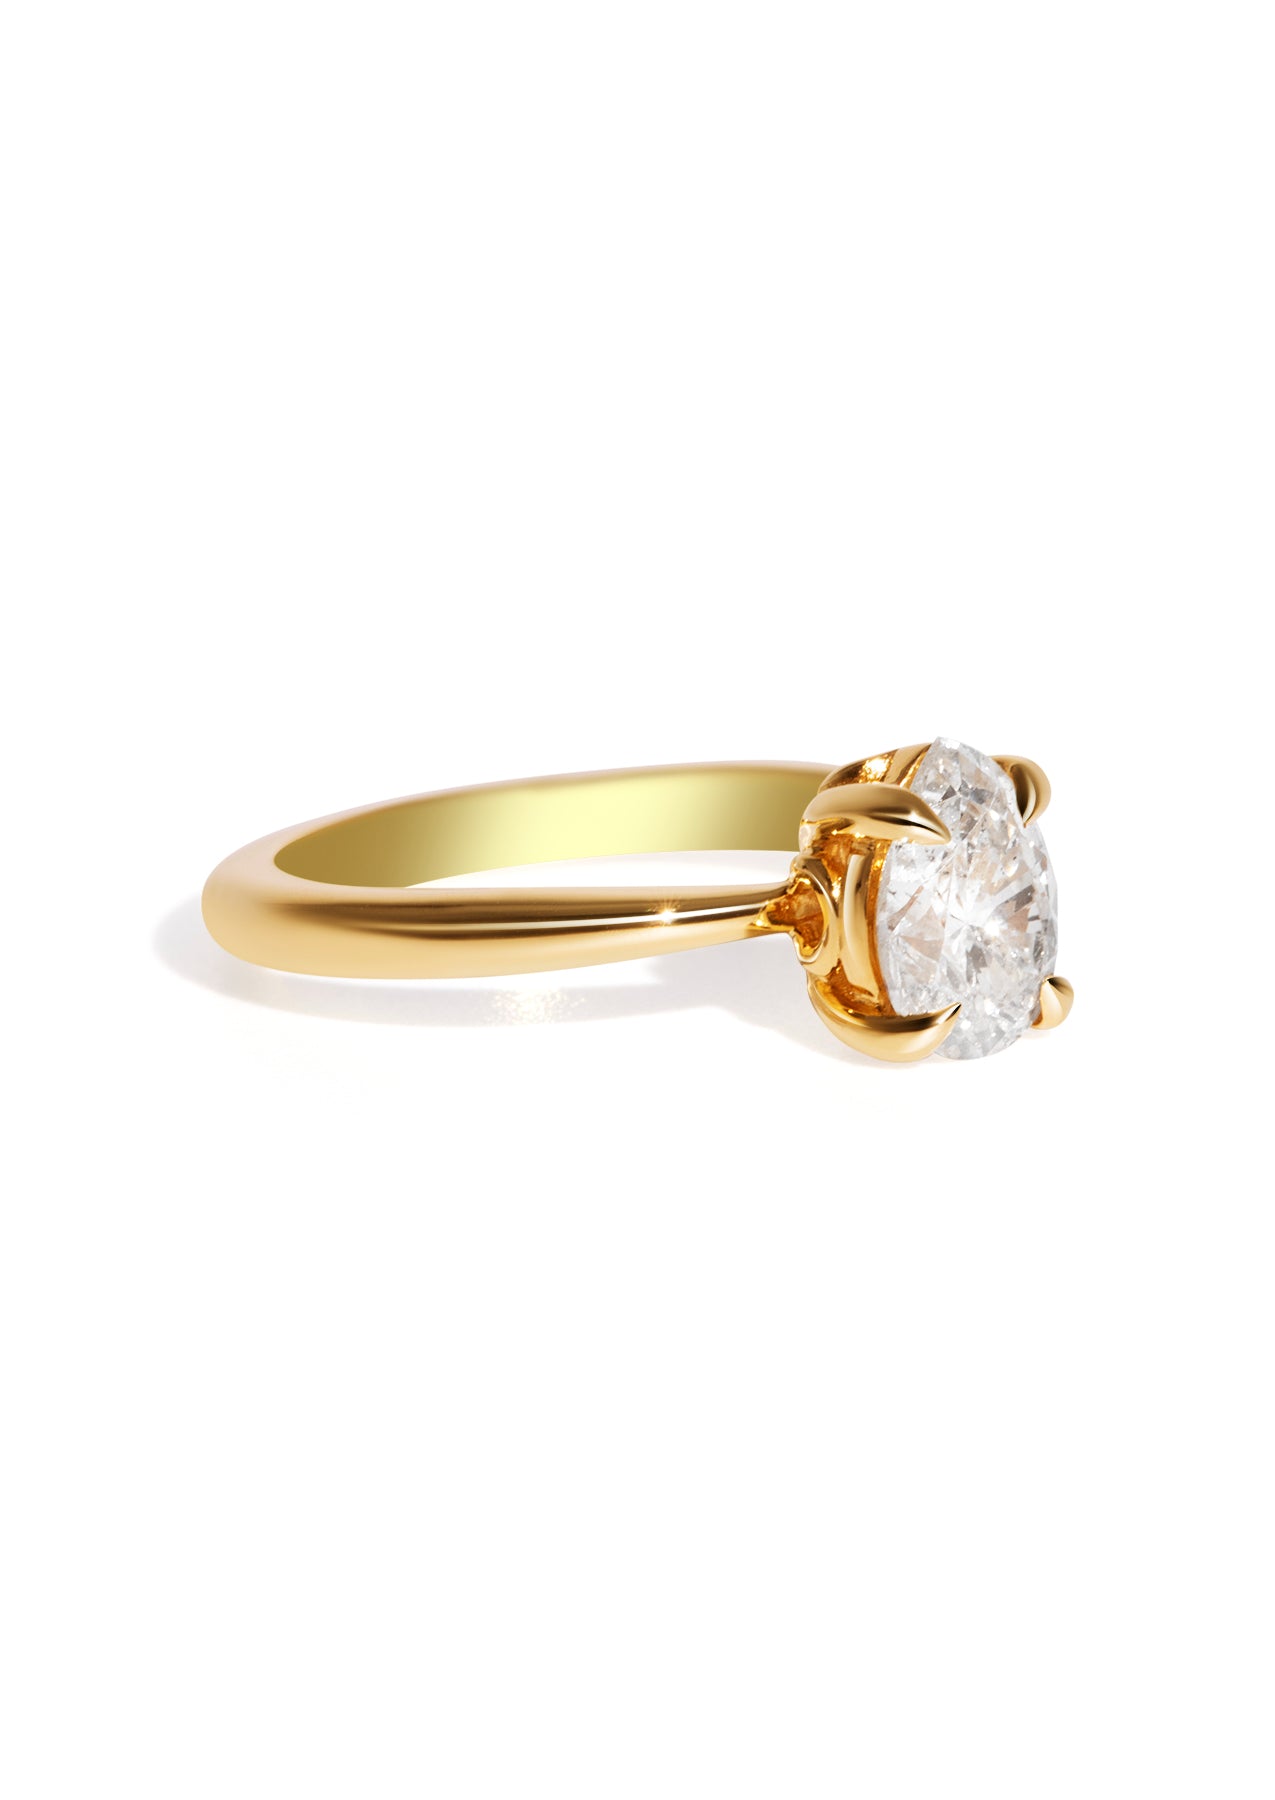 The June Ring with 1.33ct Pear Diamond